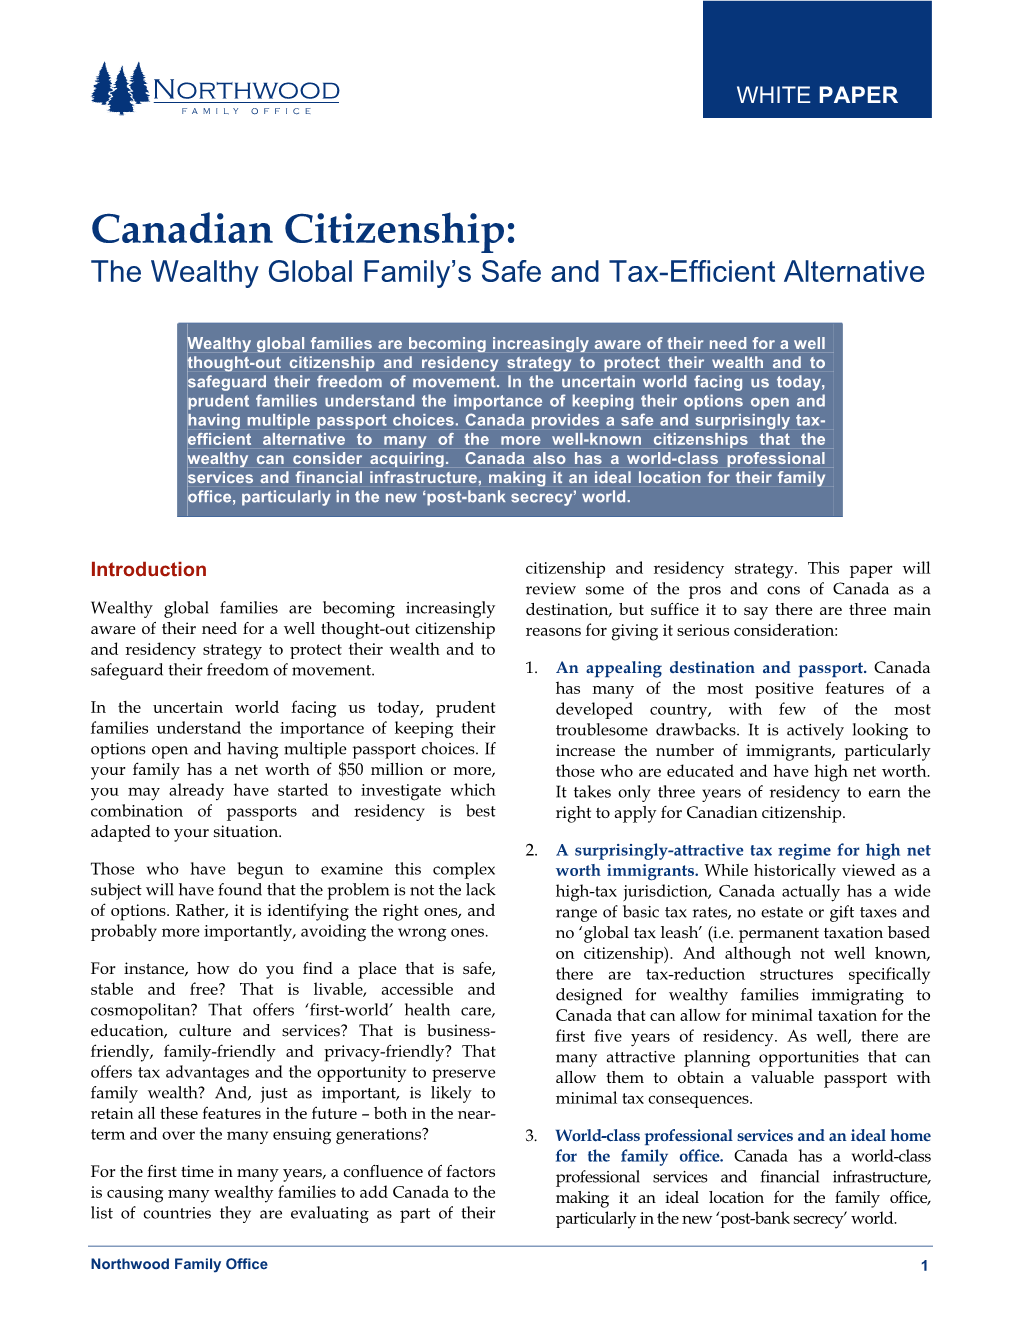 Canadian Citizenship: the Wealthy Global Family's Safe and Tax